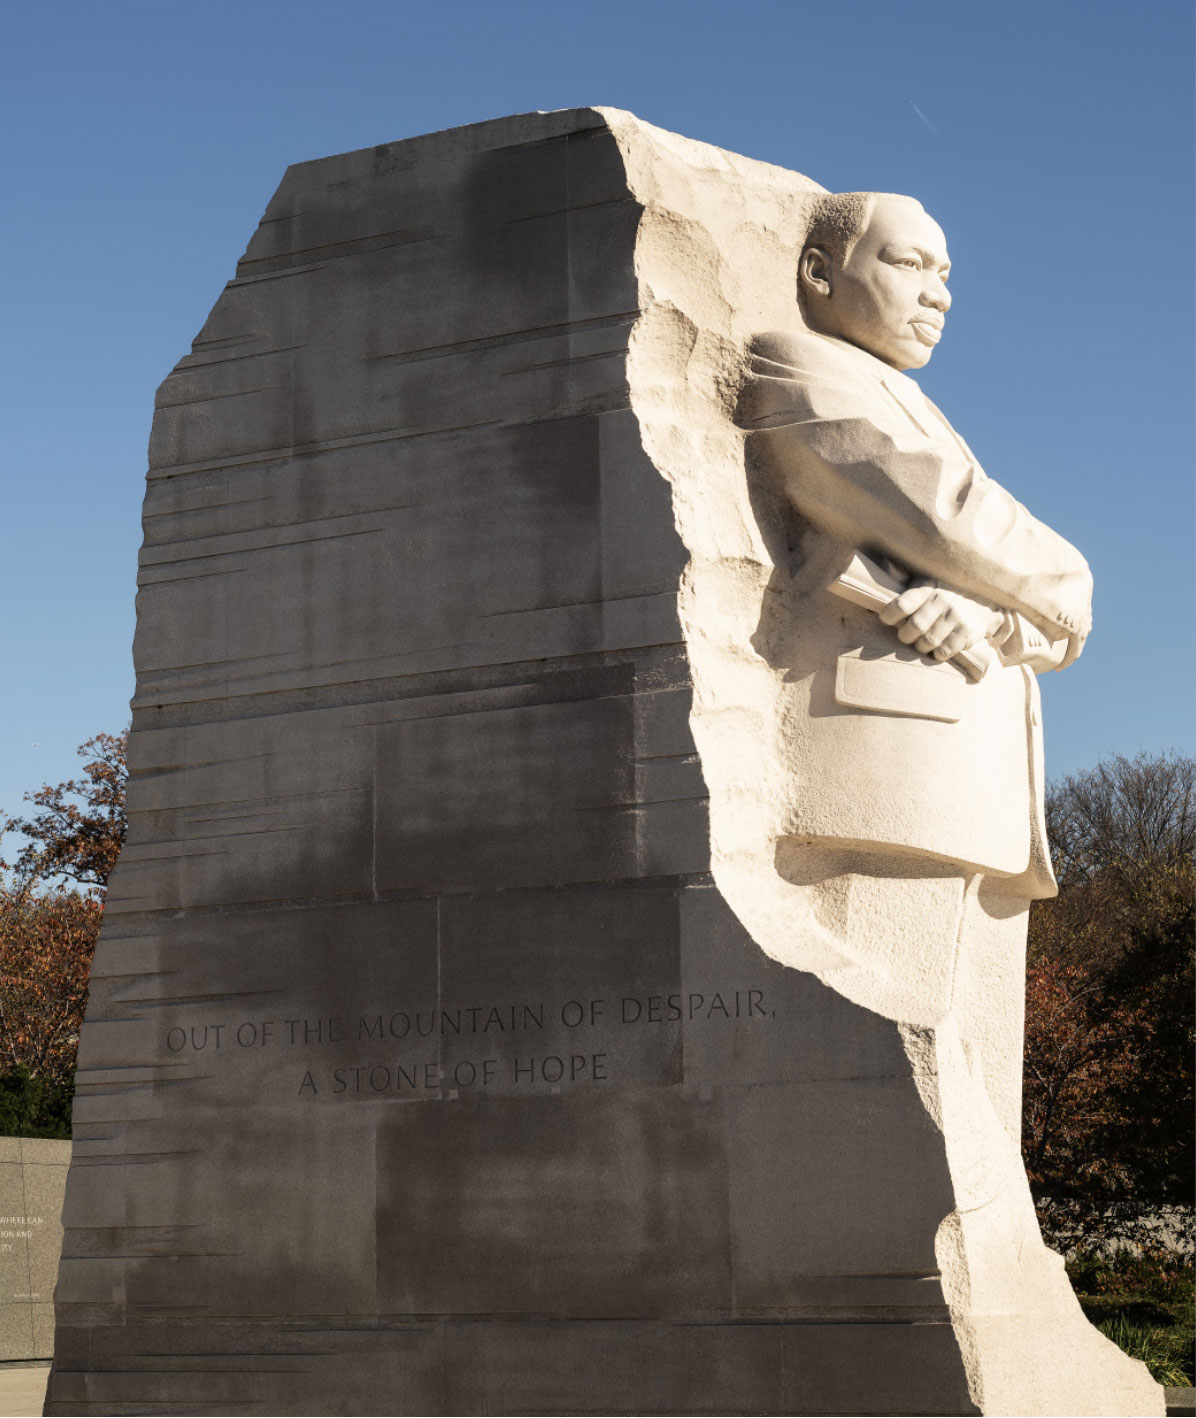 The Martin Luther King, Jr. Memorial is located in West Potomac Park next to the National Mall